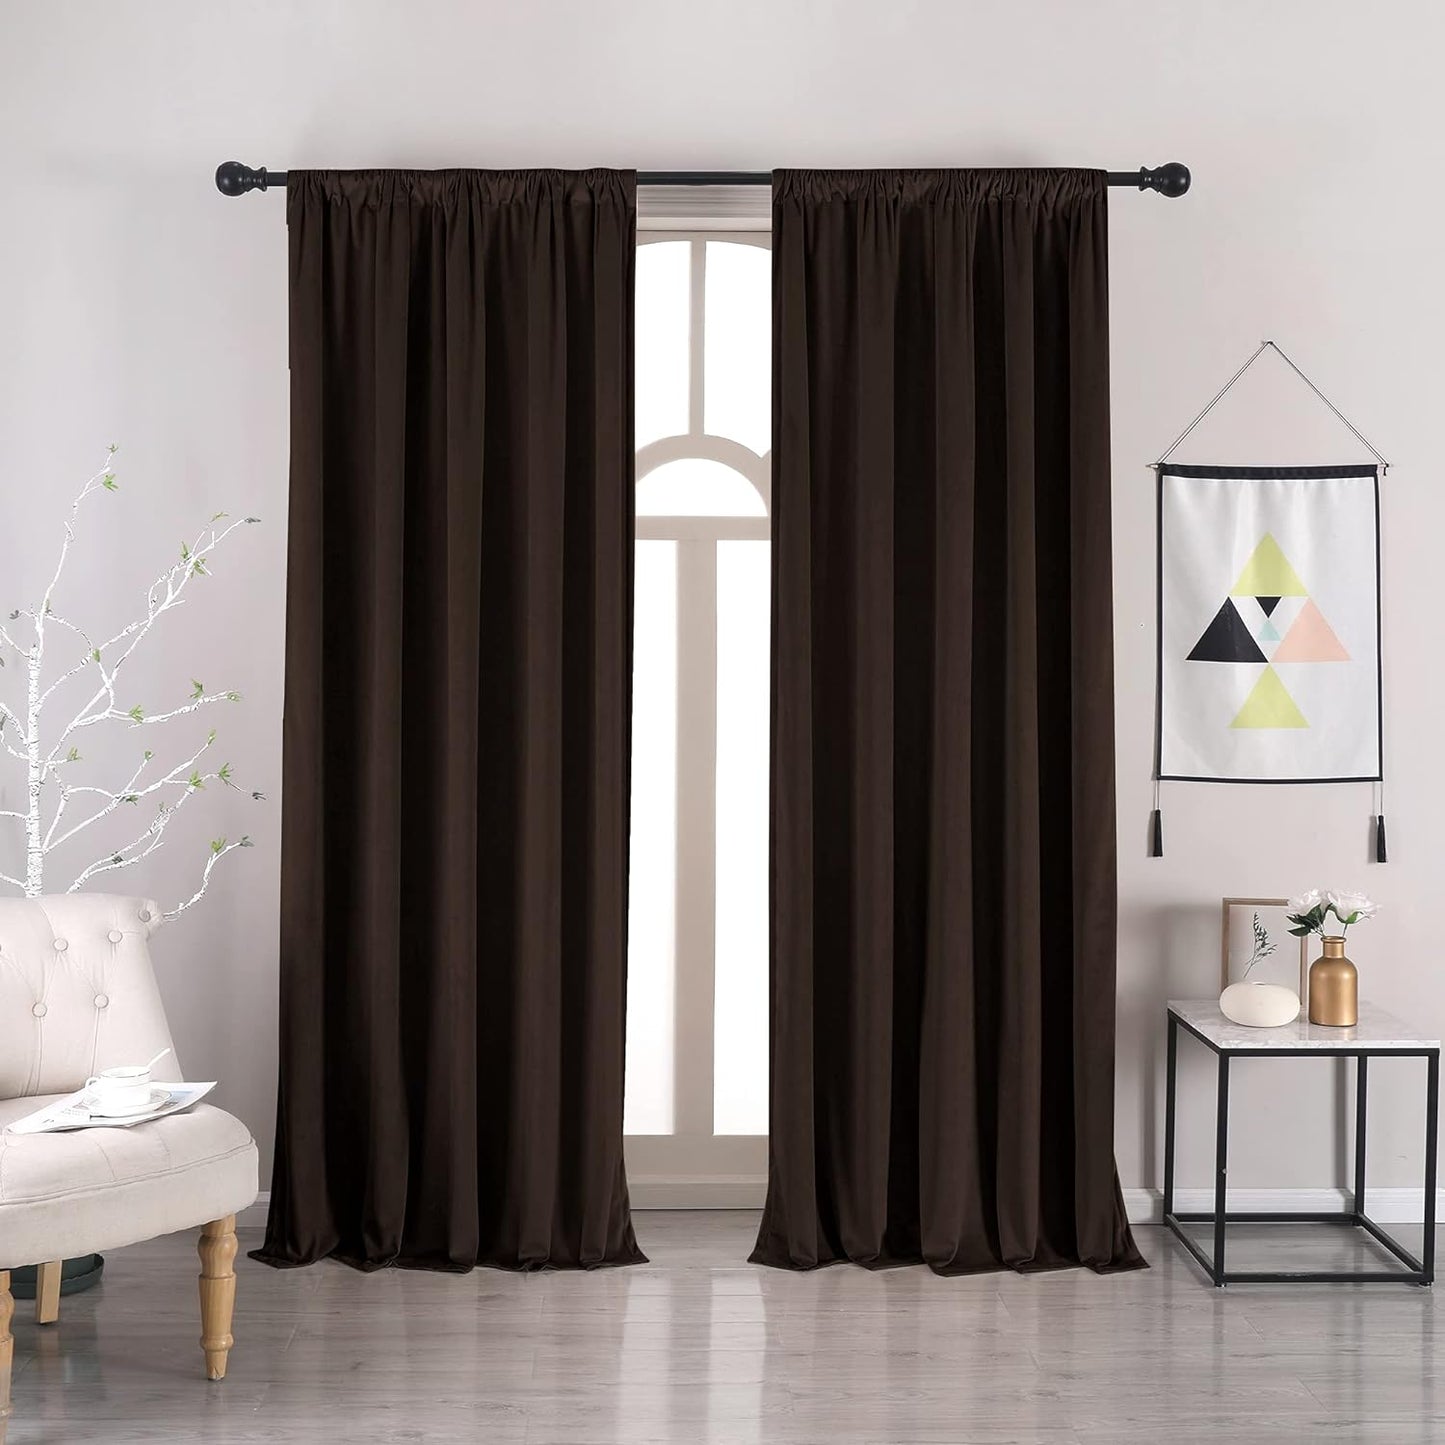 Nanbowang Green Velvet Curtains 63 Inches Long Dark Green Light Blocking Rod Pocket Window Curtain Panels Set of 2 Heat Insulated Curtains Thermal Curtain Panels for Bedroom  nanbowang Brown 42"X84" 